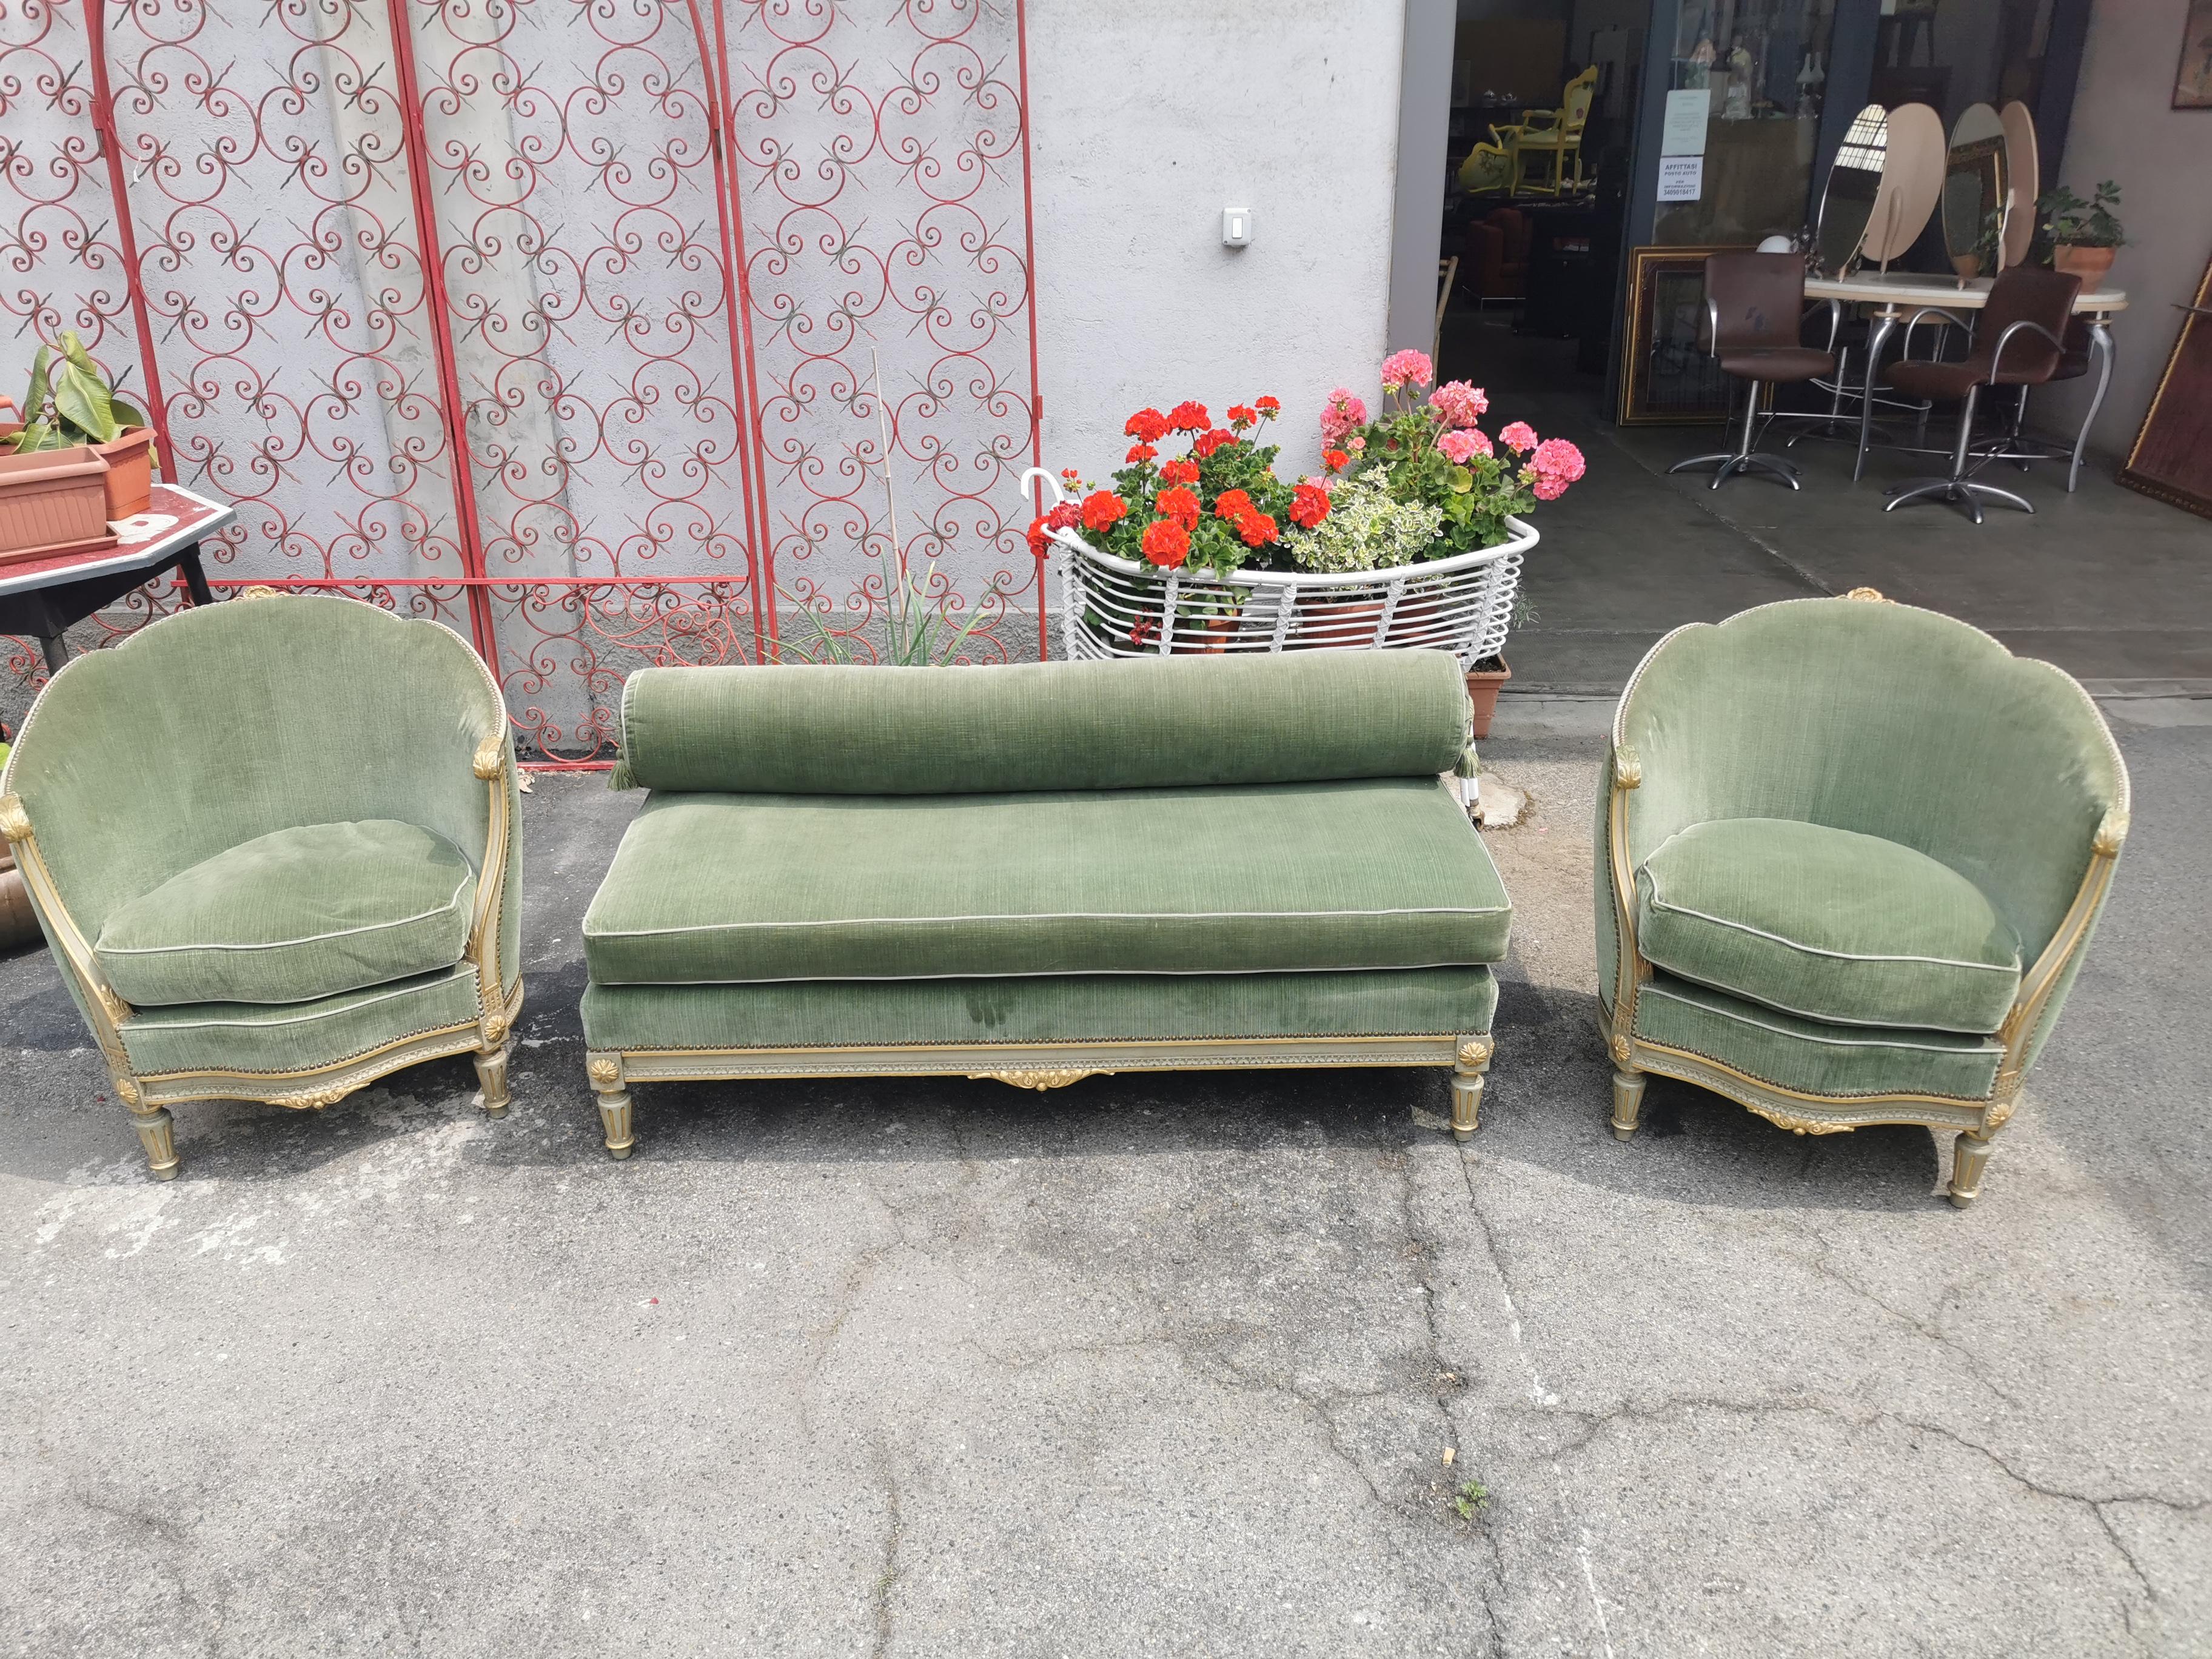 Louis XVI Style French daybed set circa 1950-1960 in excellent condition very quality and also very comfortable sitting space measures daybed 70x145x45H cm
pair of armchairs 65x70x80H cm 

will be shipped inside a wood secured box.